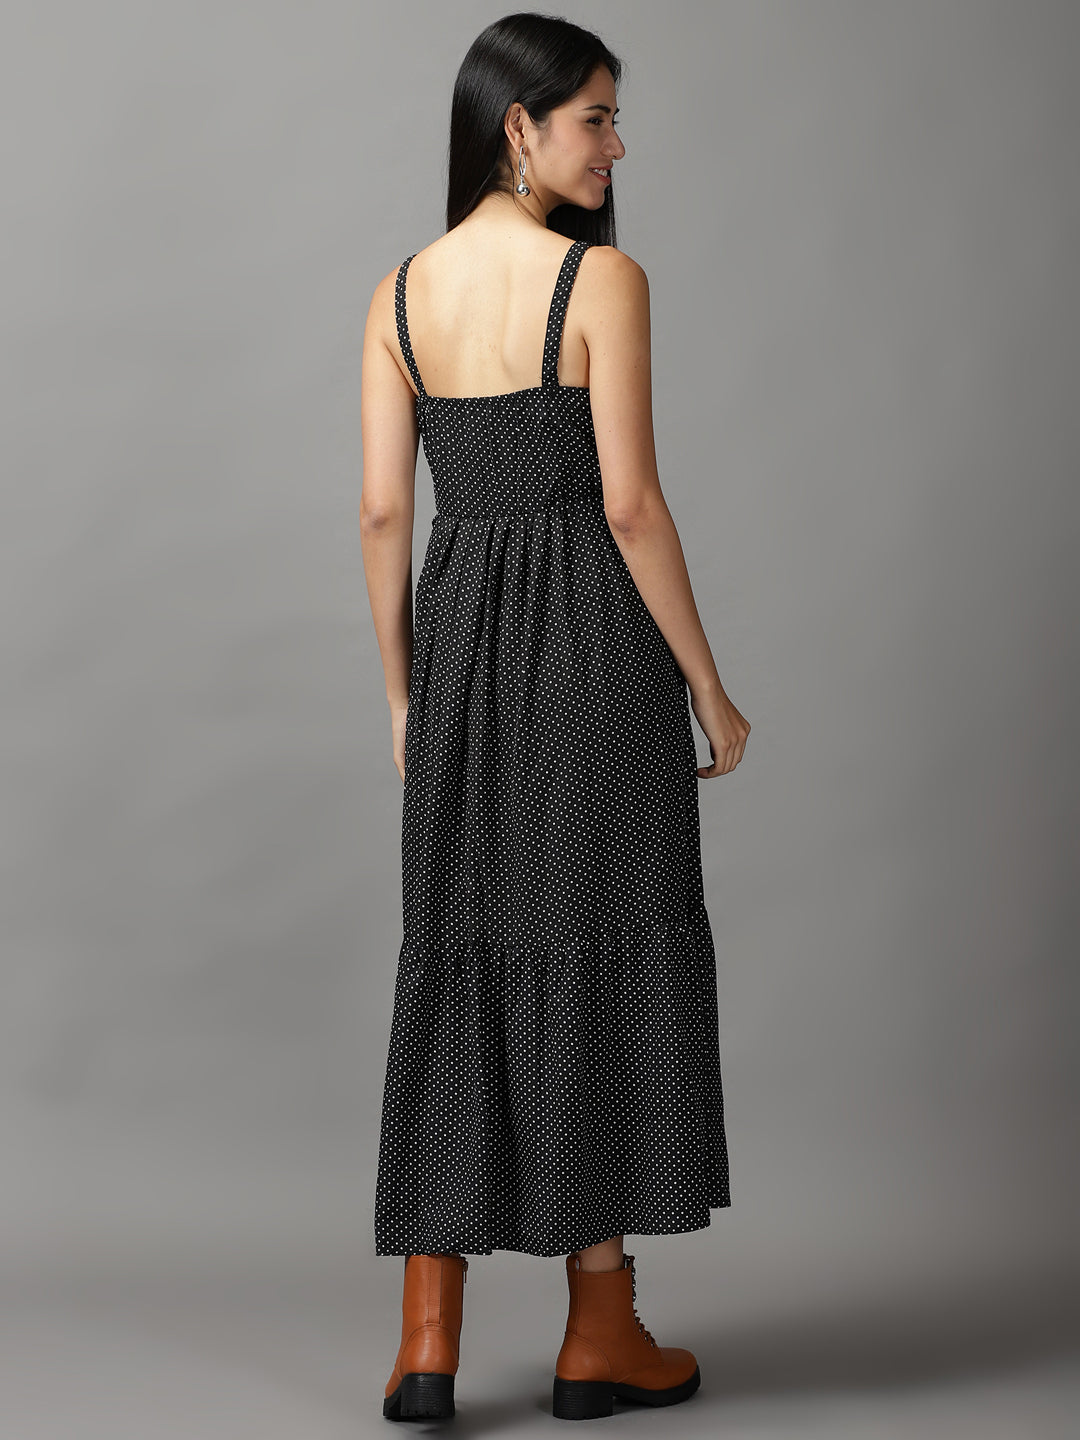 Women's Black Polka Dots Fit and Flare Dress